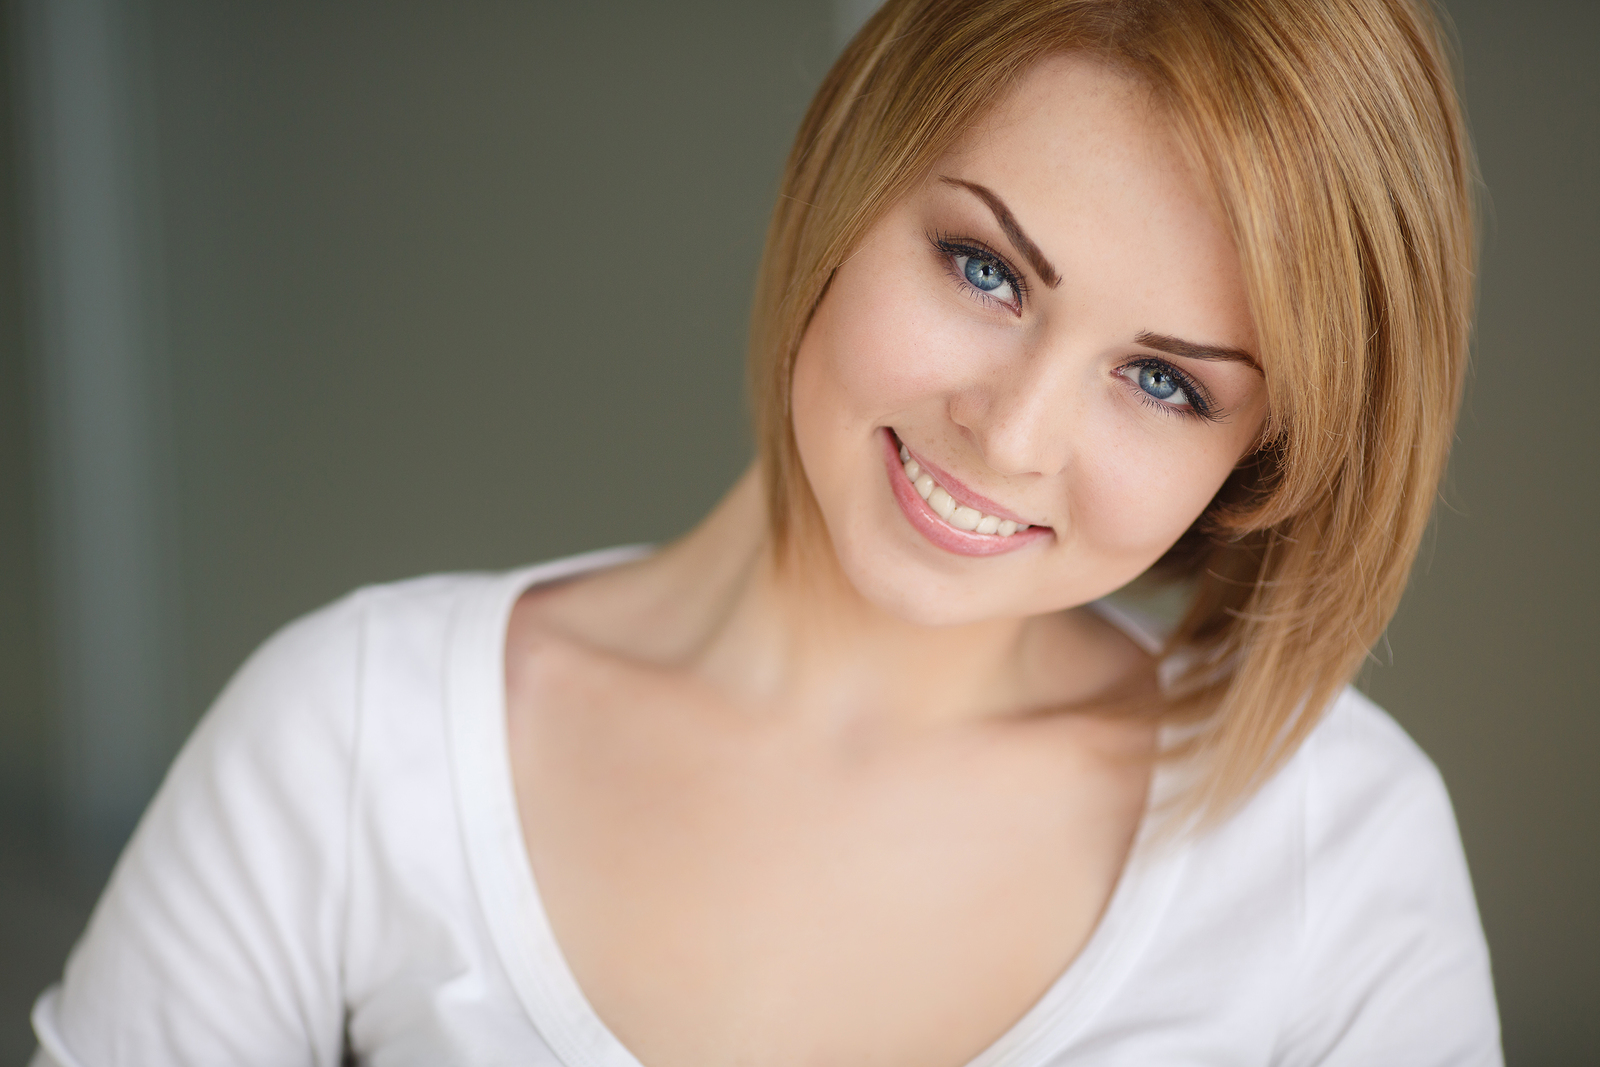 A beautiful portrait of a fair-haired young woman with beautiful hair,grey eyes,sweet smile and beautiful eyebrows,dressed in a white t-shirt with a deep neckline,isolated on a gray background.